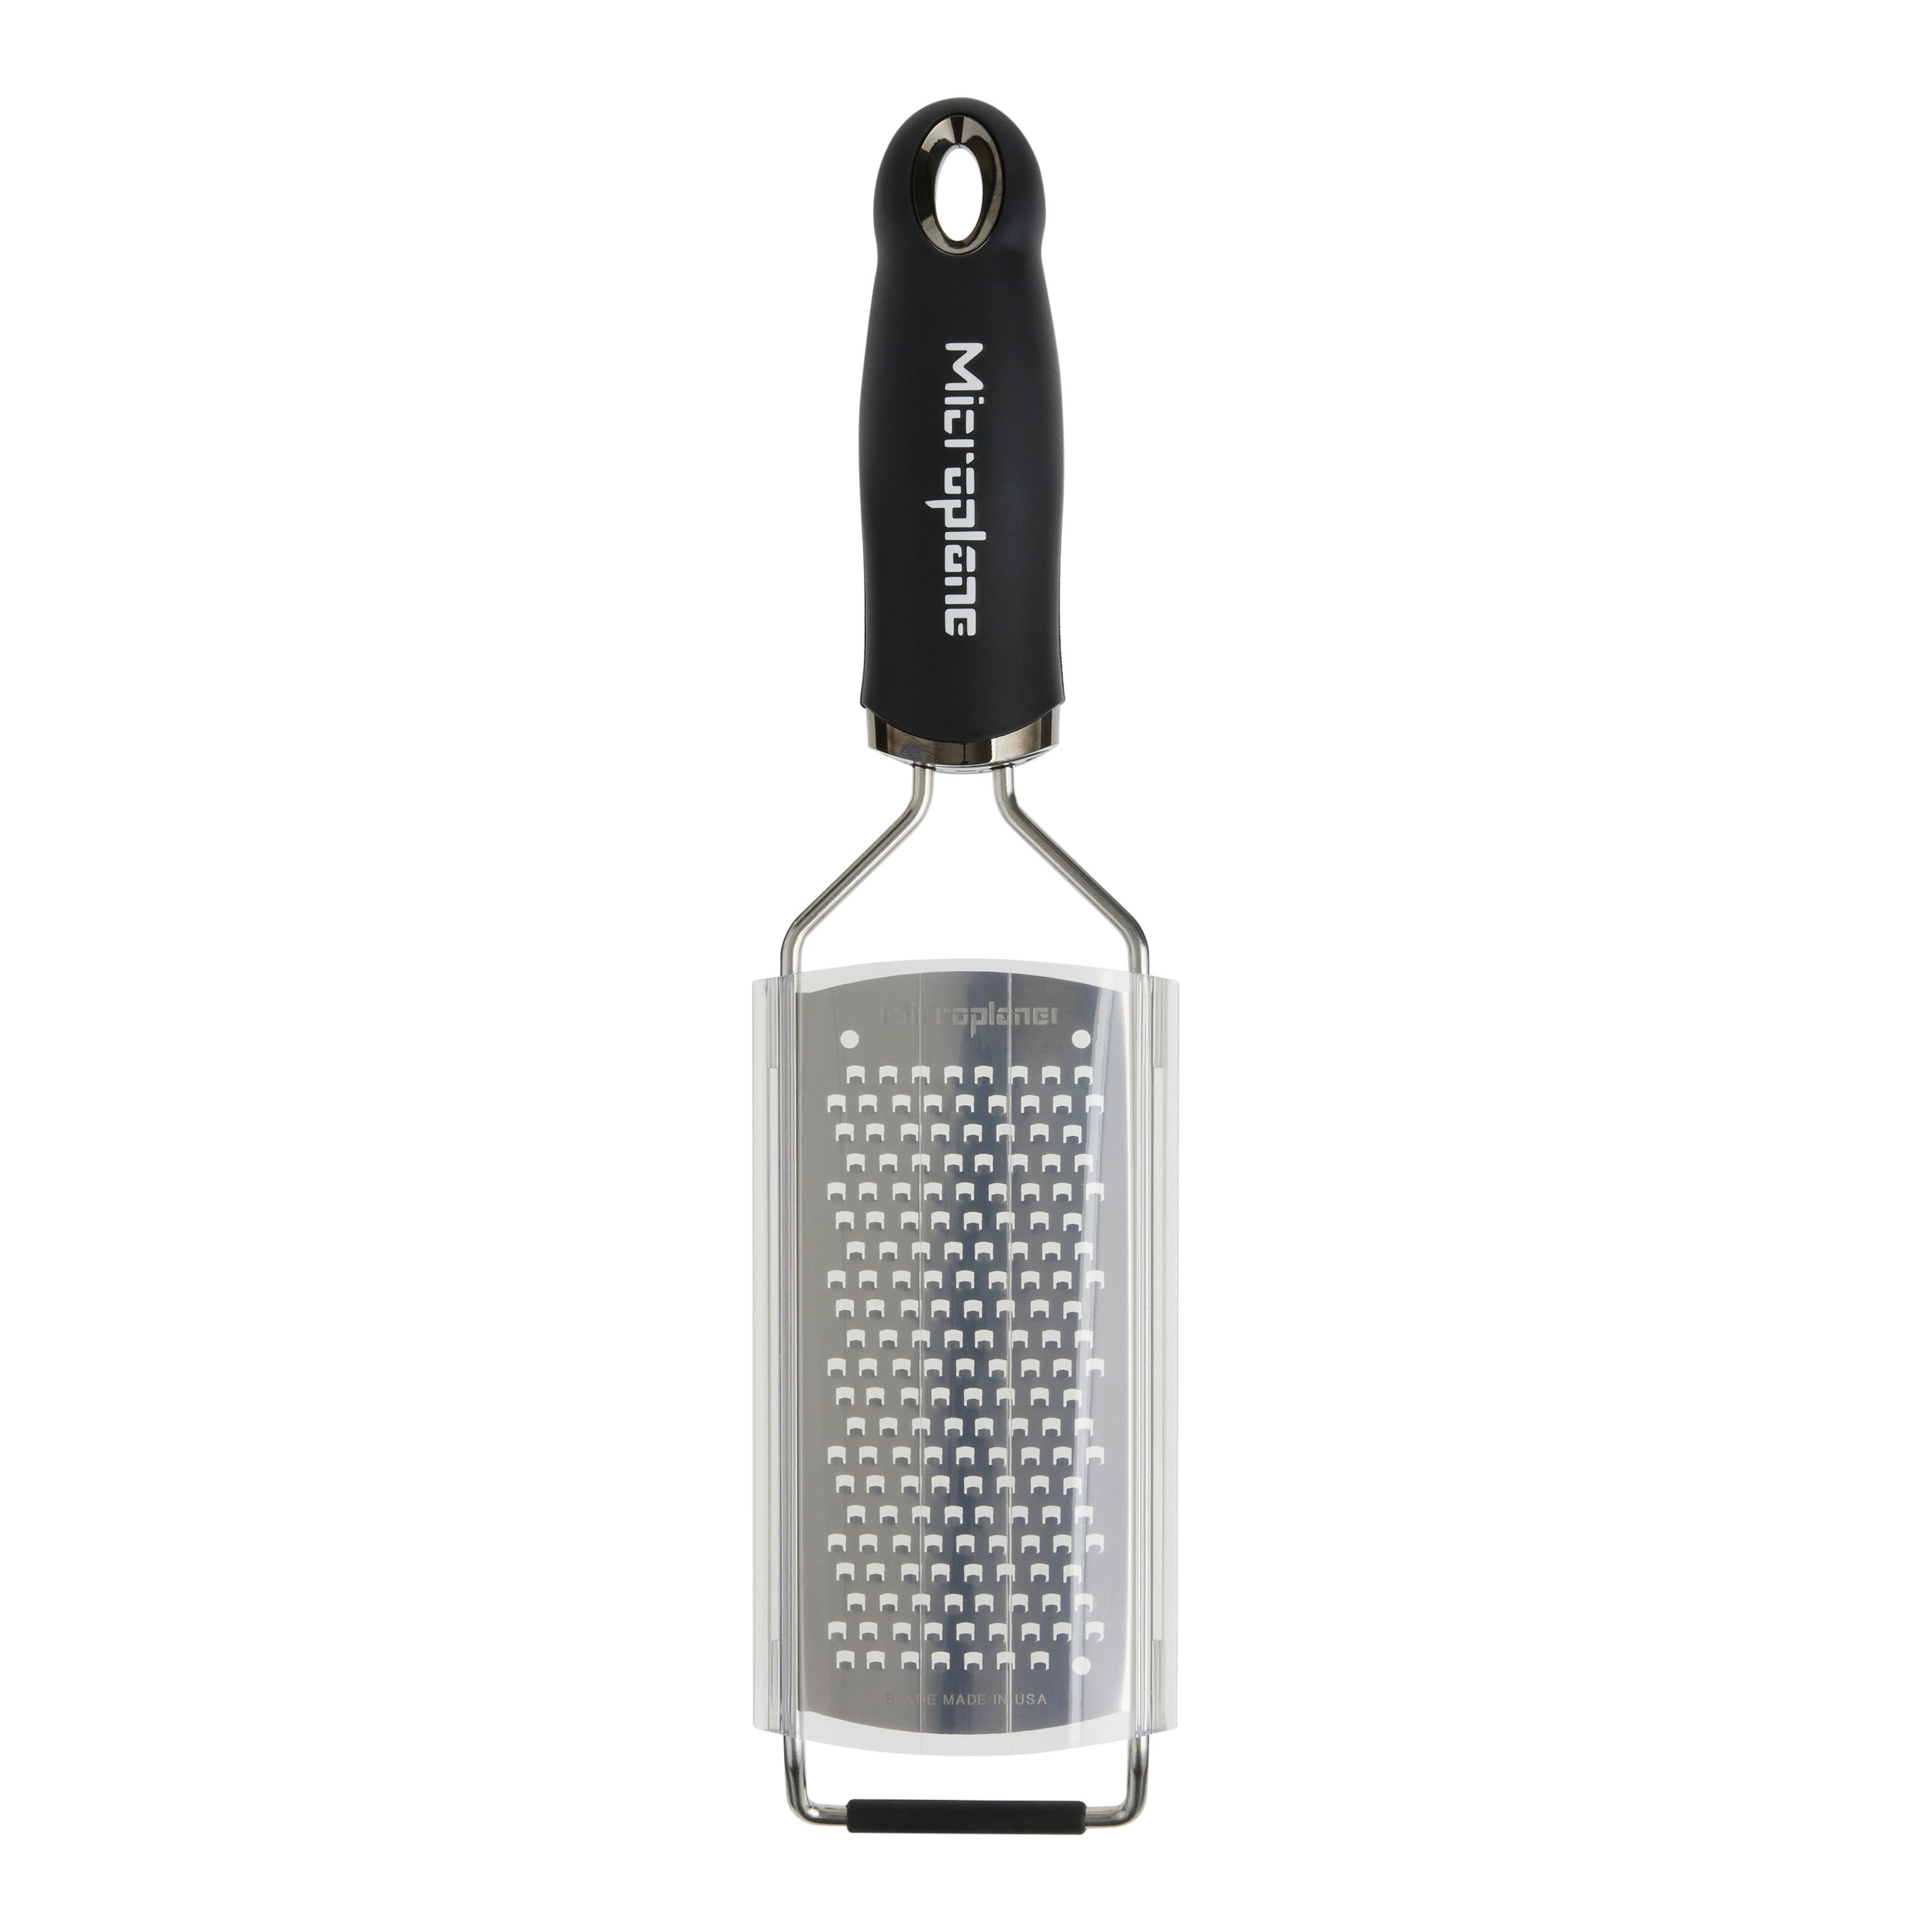 MoHA Stainless Steel Drum Cheese Grater - World Market